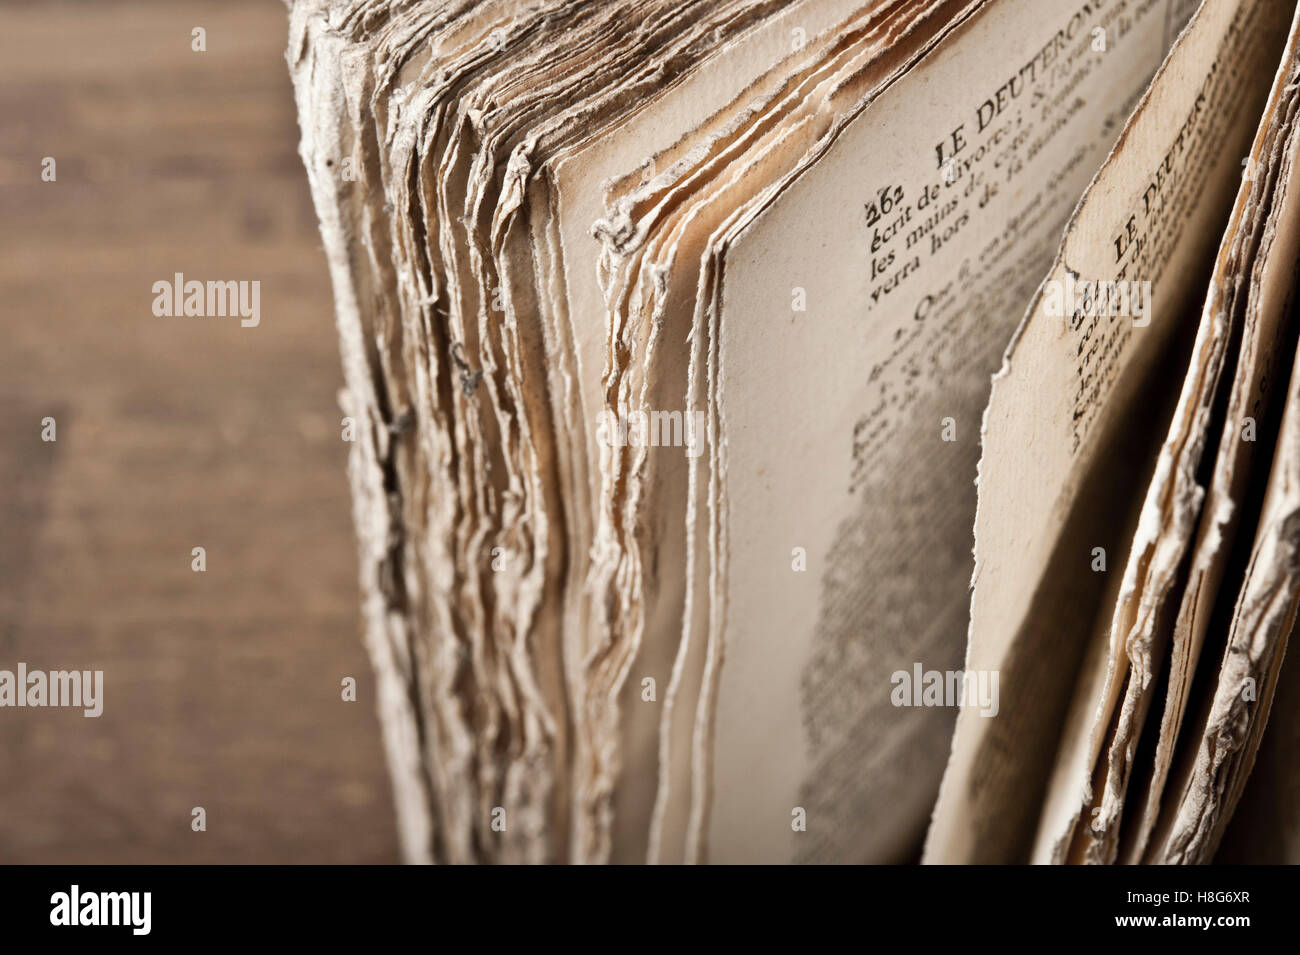 very old and damaged book from 1758 Stock Photo